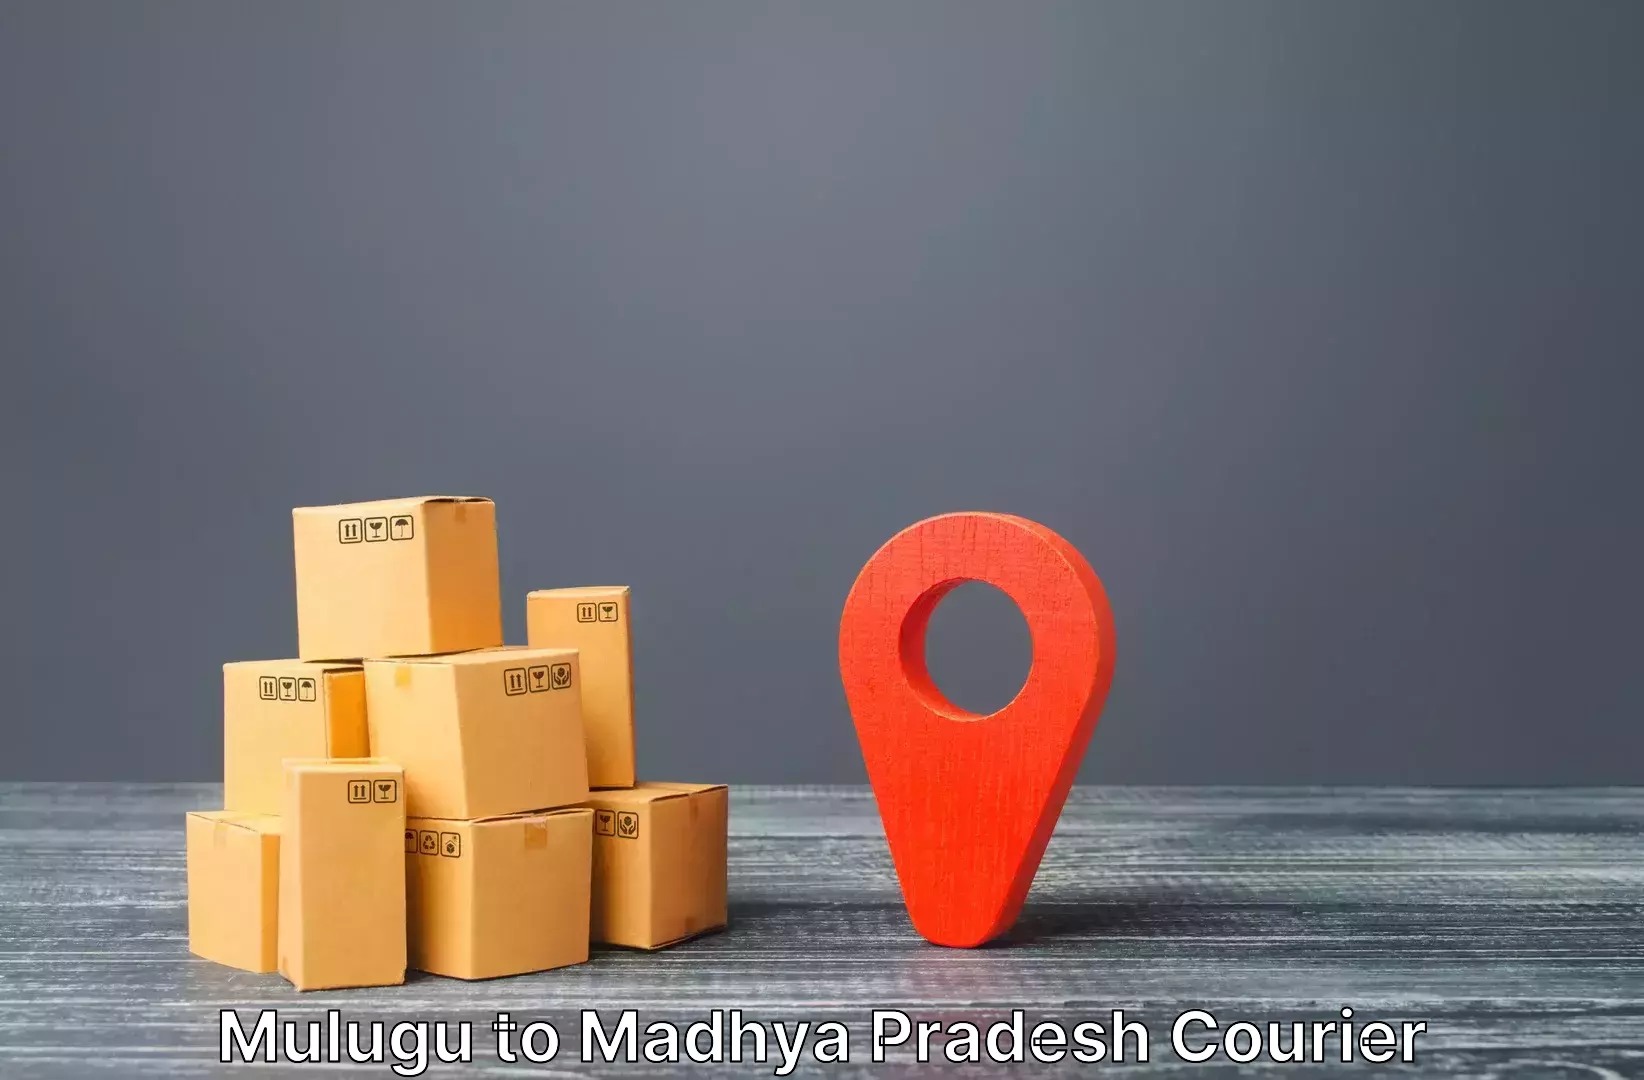 Luggage shipment specialists Mulugu to Pithampur